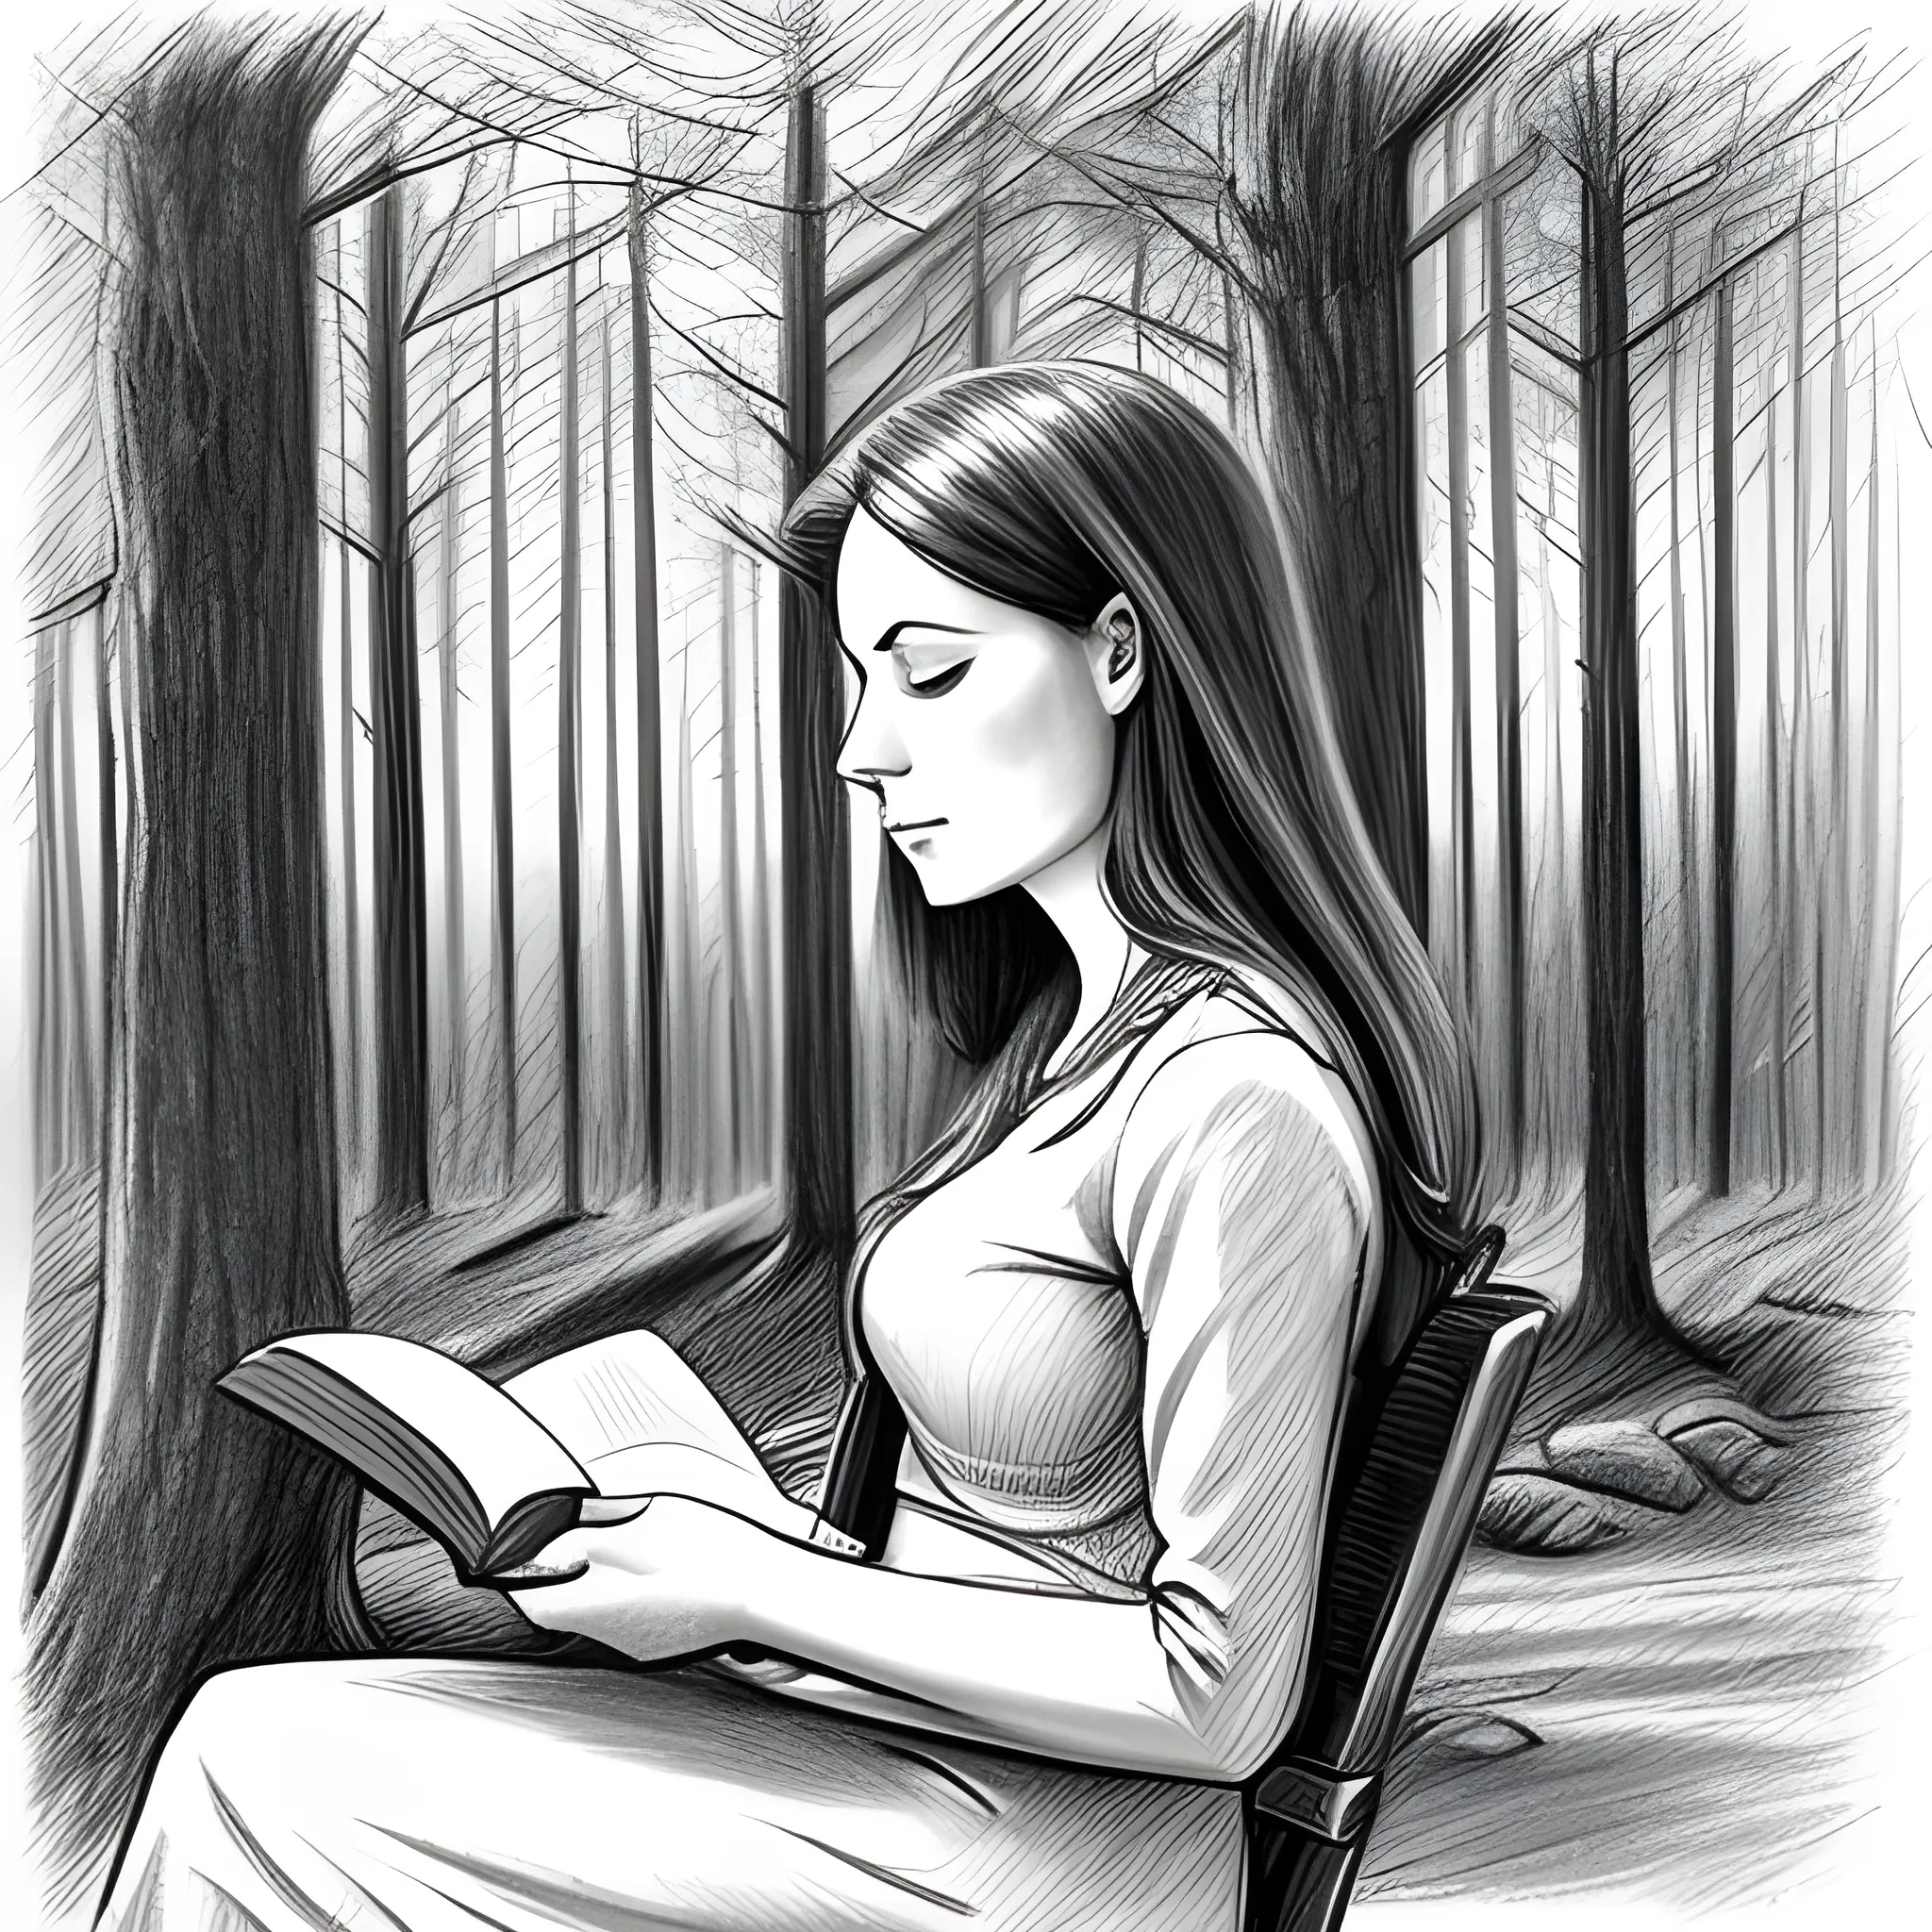 pencil sketch of a woman reading a book in a forest